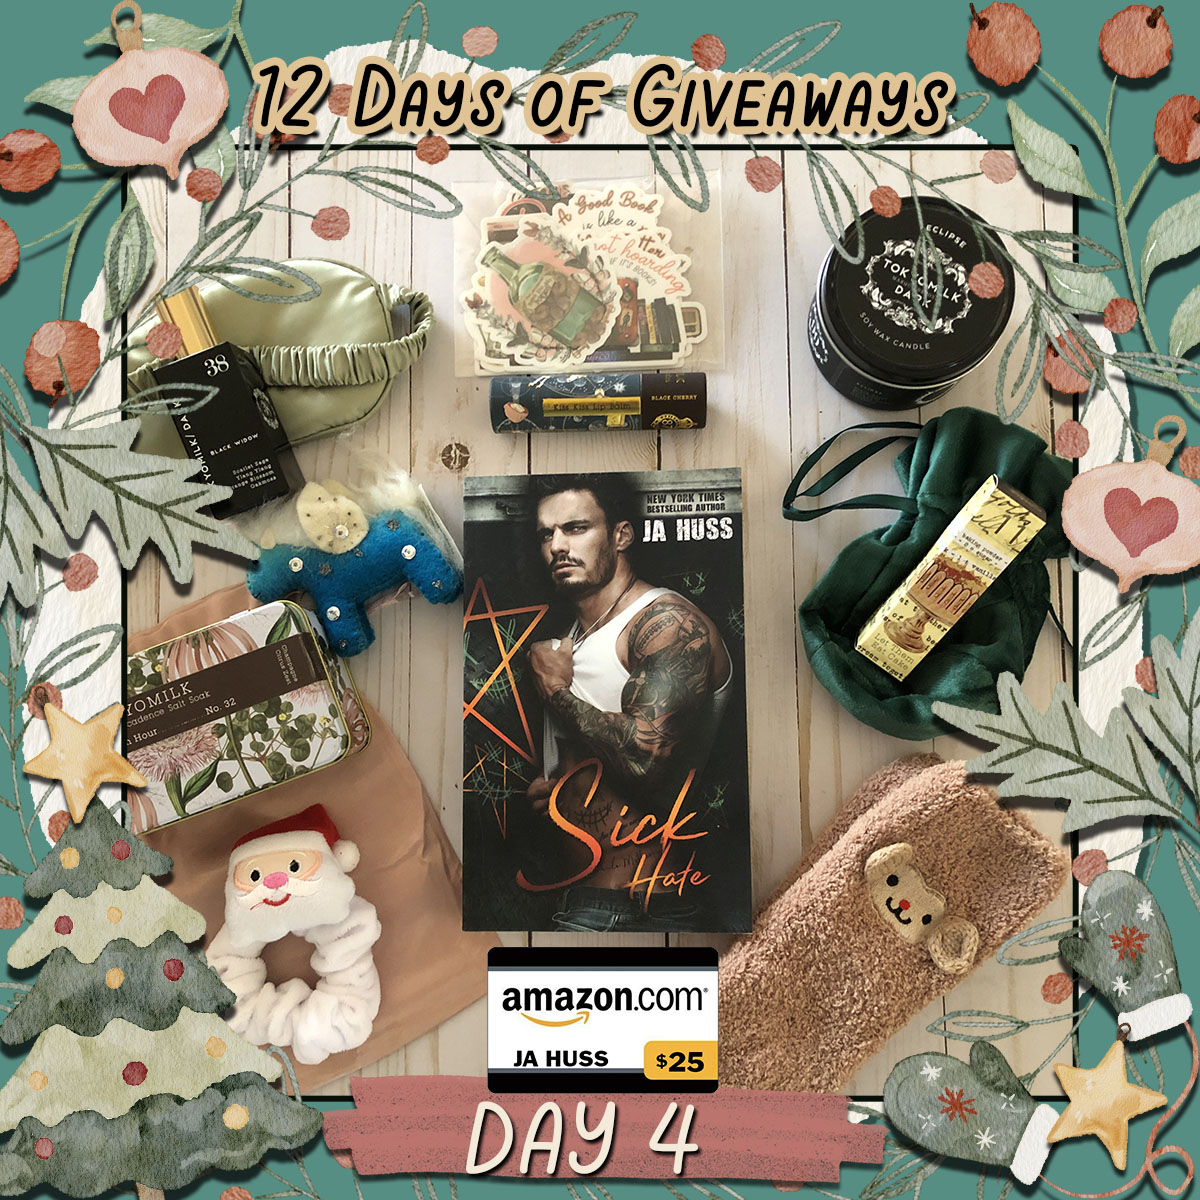 CLOSED - Day 7 of our 12 Days of Giveaways is here and we think